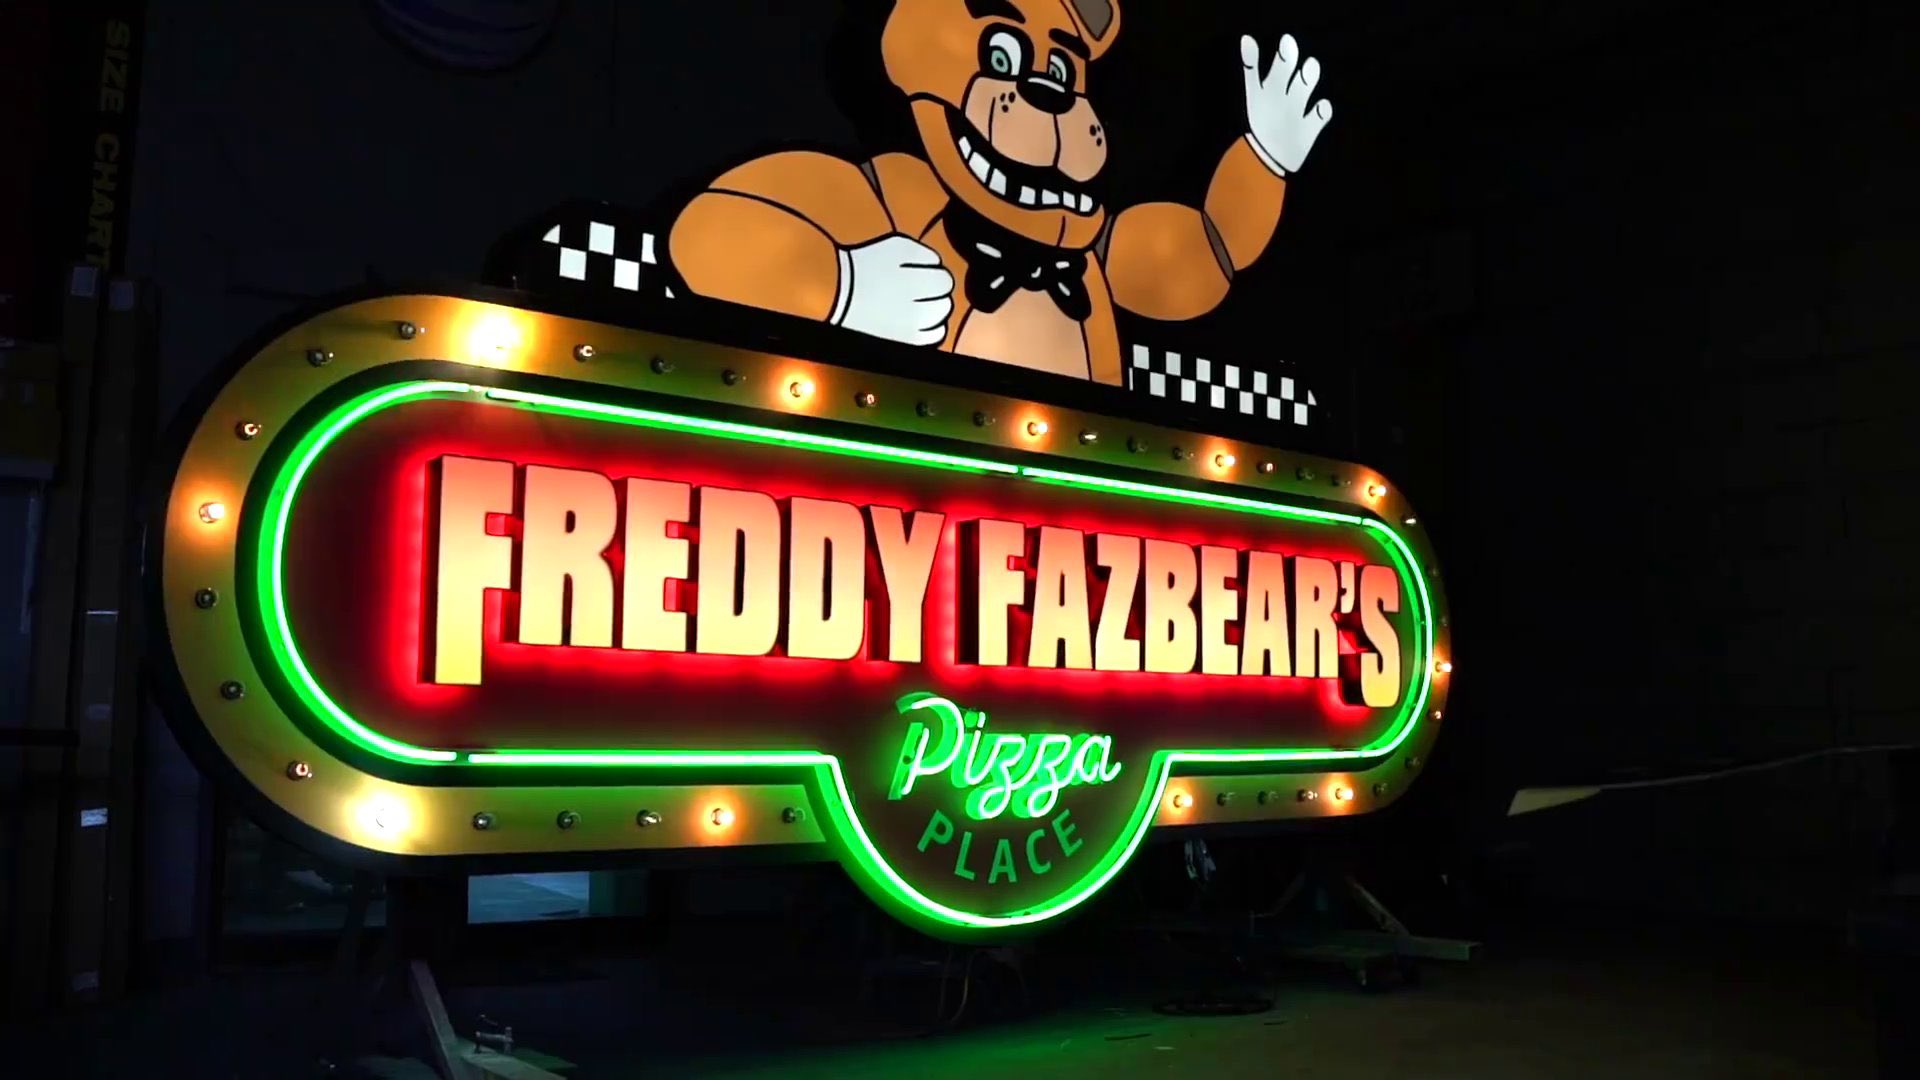 🐻 FNAF Movie Info 📽 on X: Filming has concluded at the Freddy Fazbear's  Pizza Place facade for 'FIVE NIGHTS AT FREDDY'S' and is now being taken  down. Source: @/Kuronoma_Aoba #FiveNightsAtFreddys #FNAF #